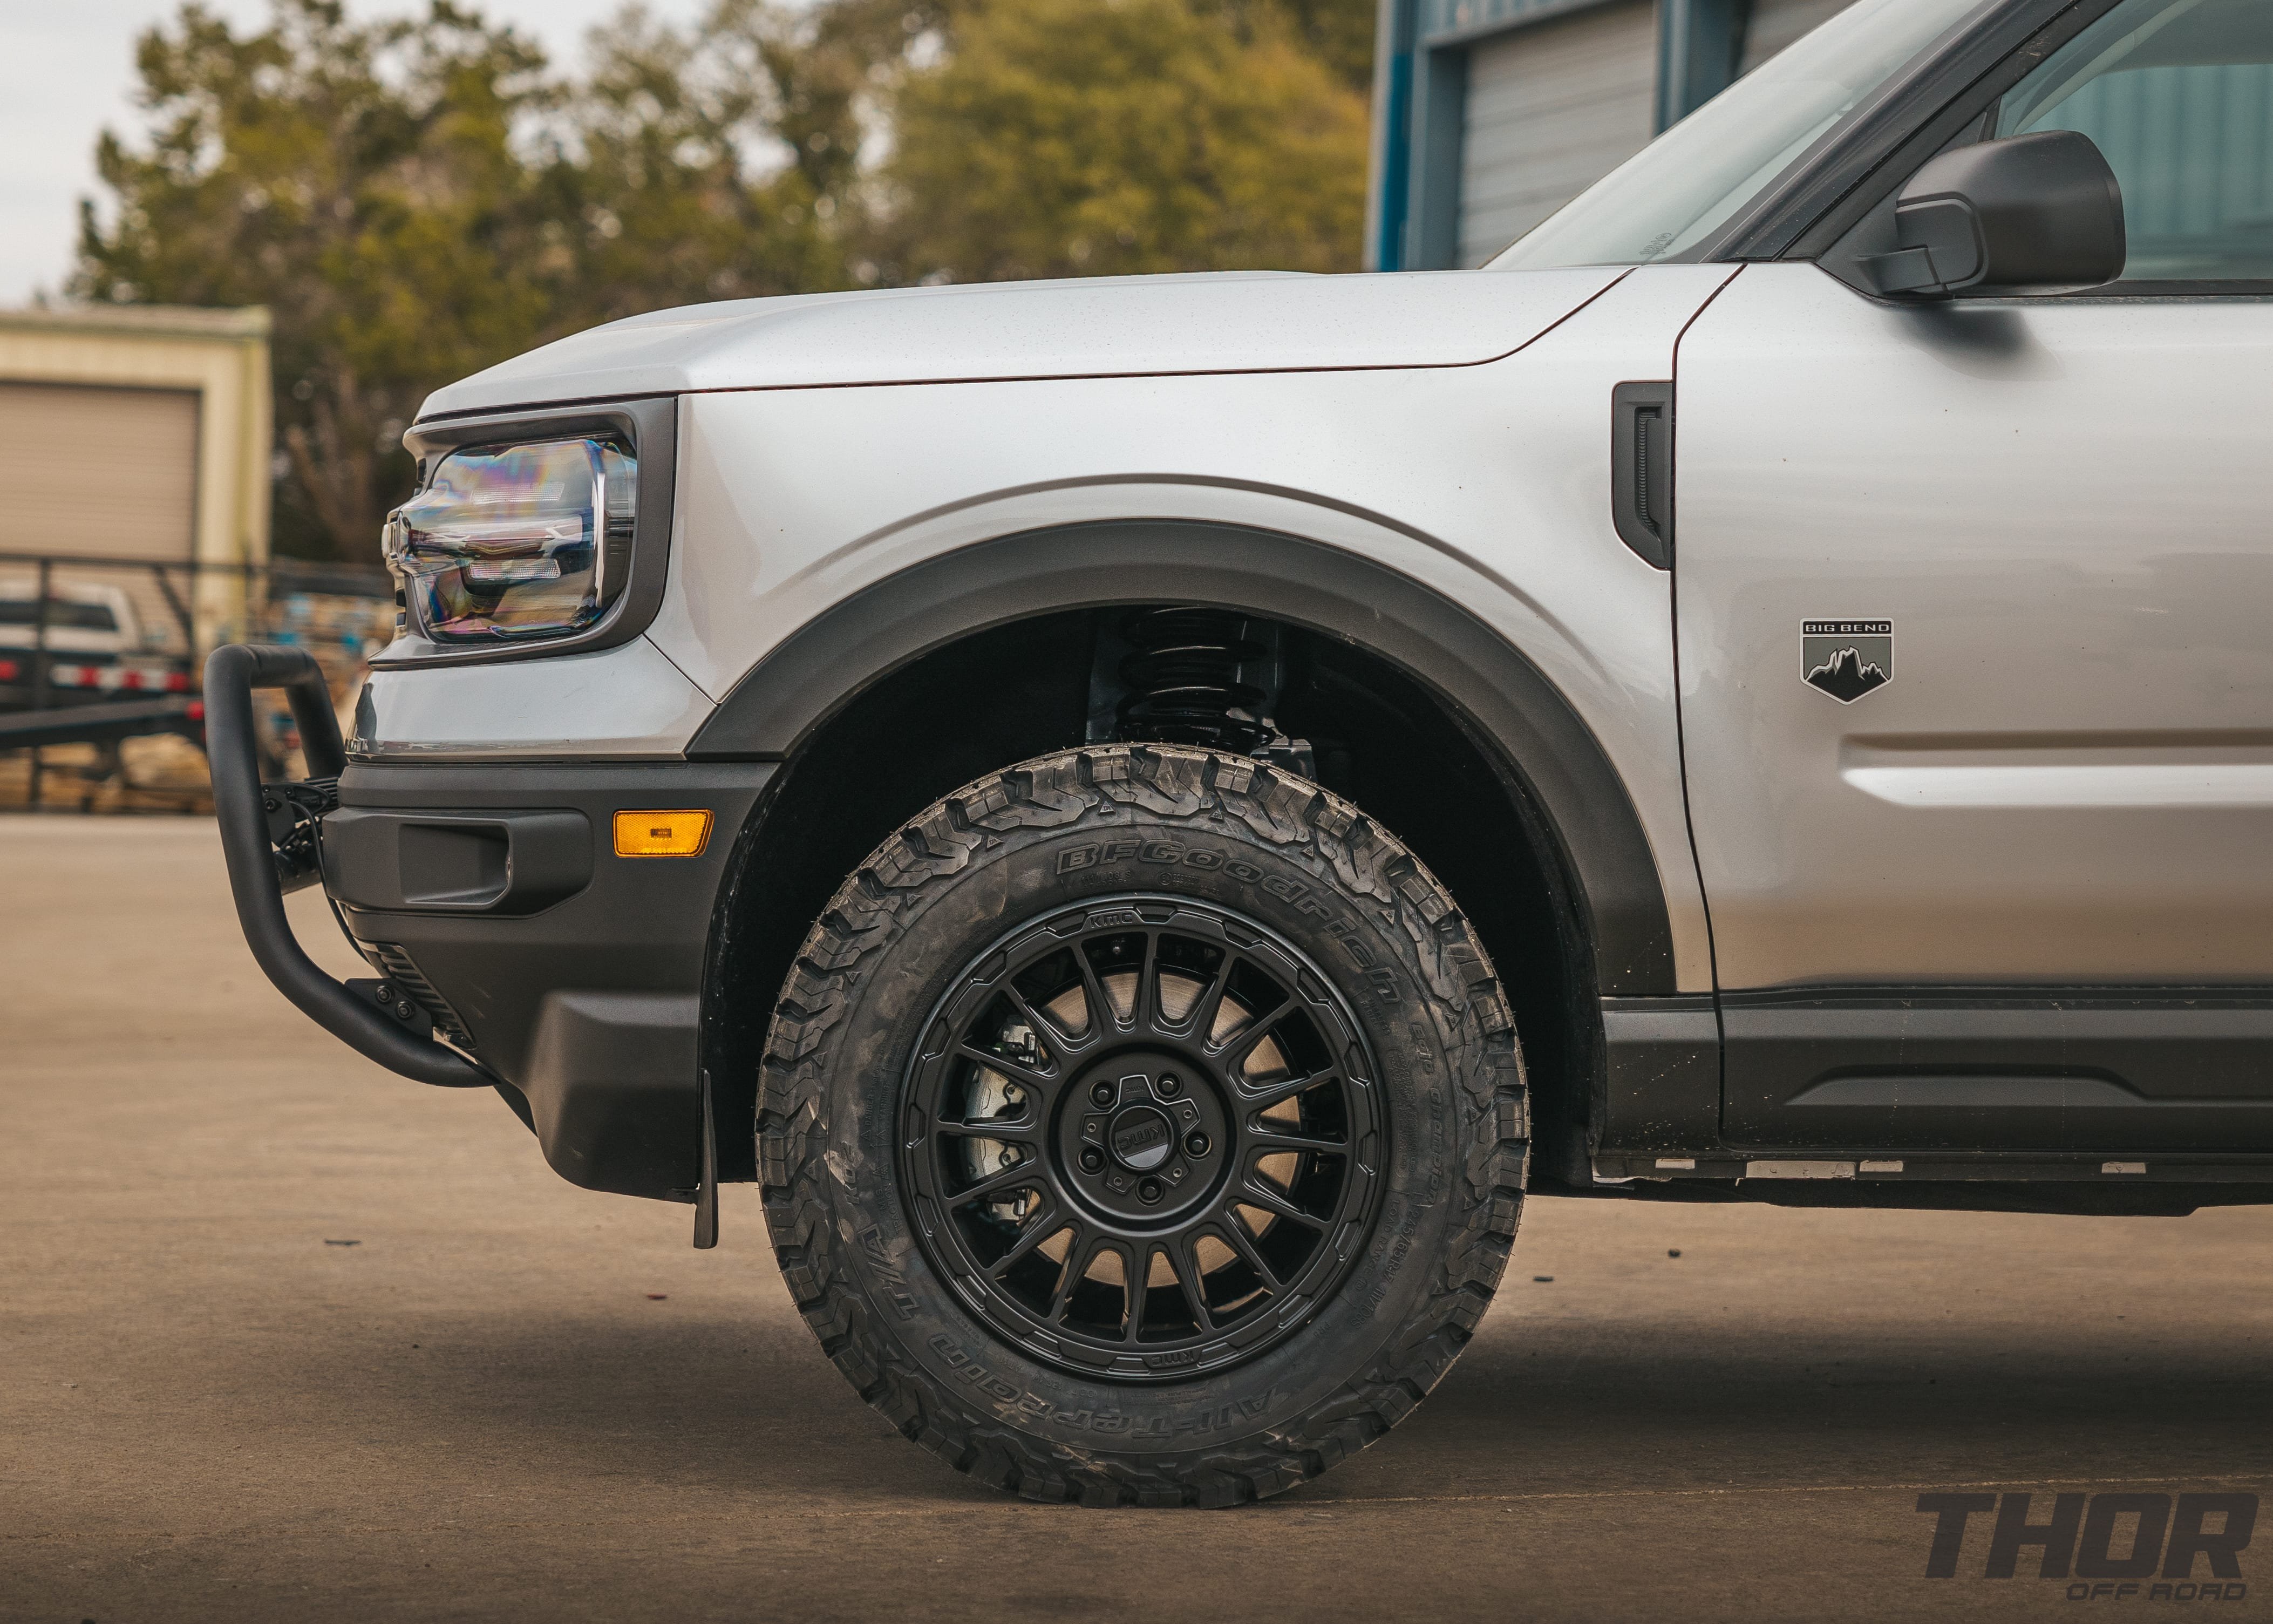 2021 Ford Bronco Big Bend in Silver with 1.5" ReadyLift Suspension Kit, 17x8" KMC Wheels, 265/45R17 BFG Tires, Rough Counttry Nudge Bar, 20" Bumper Light Bar